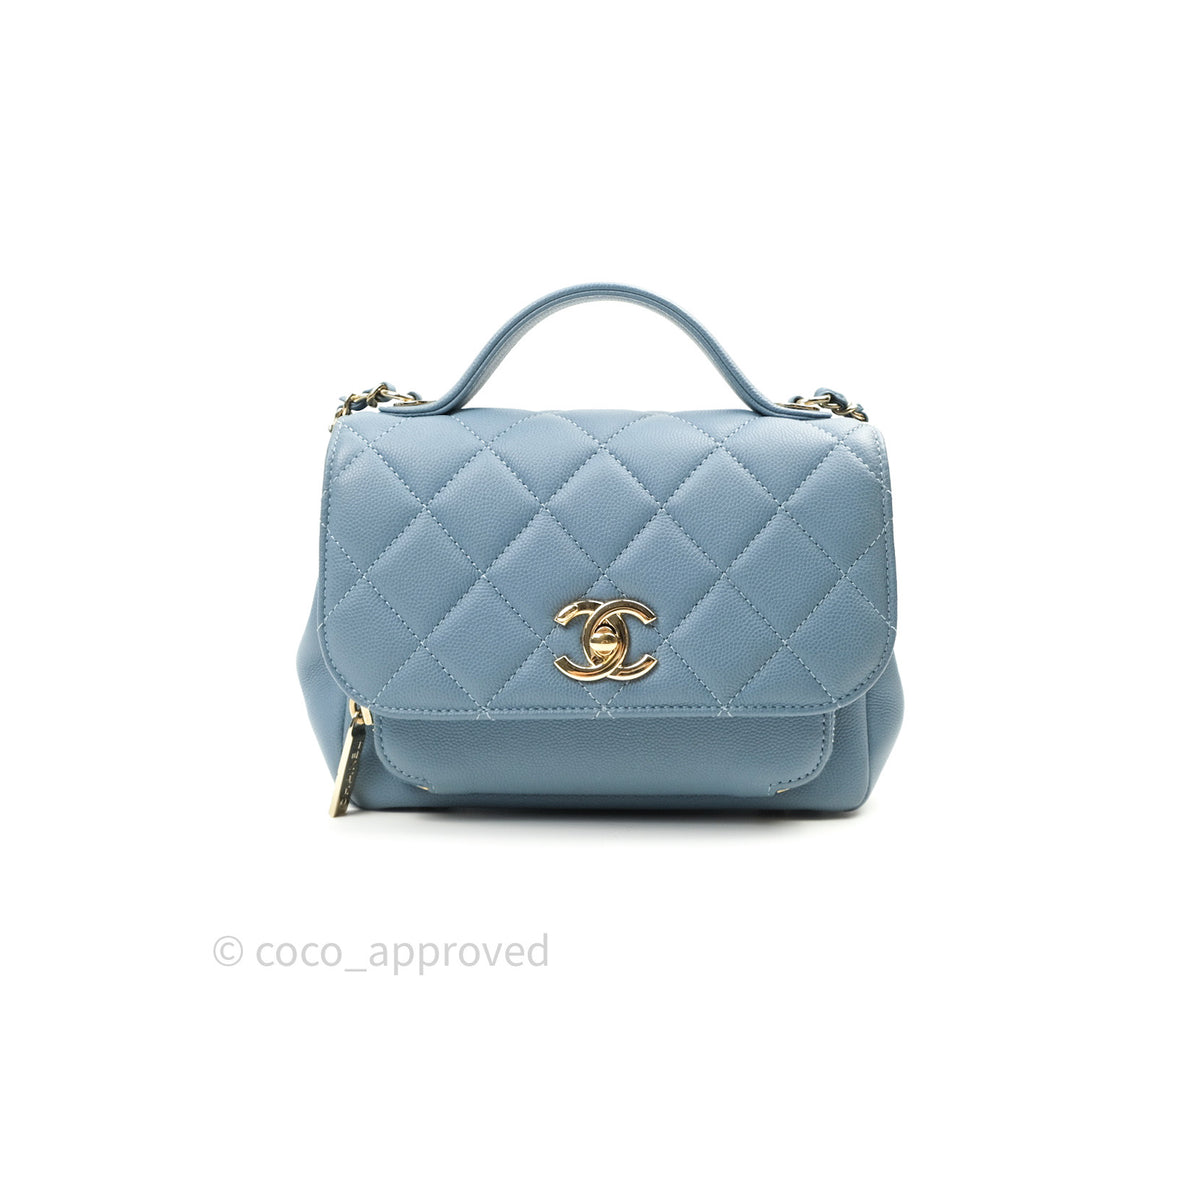 CHANEL Caviar Quilted Small Business Affinity Flap Dark Blue